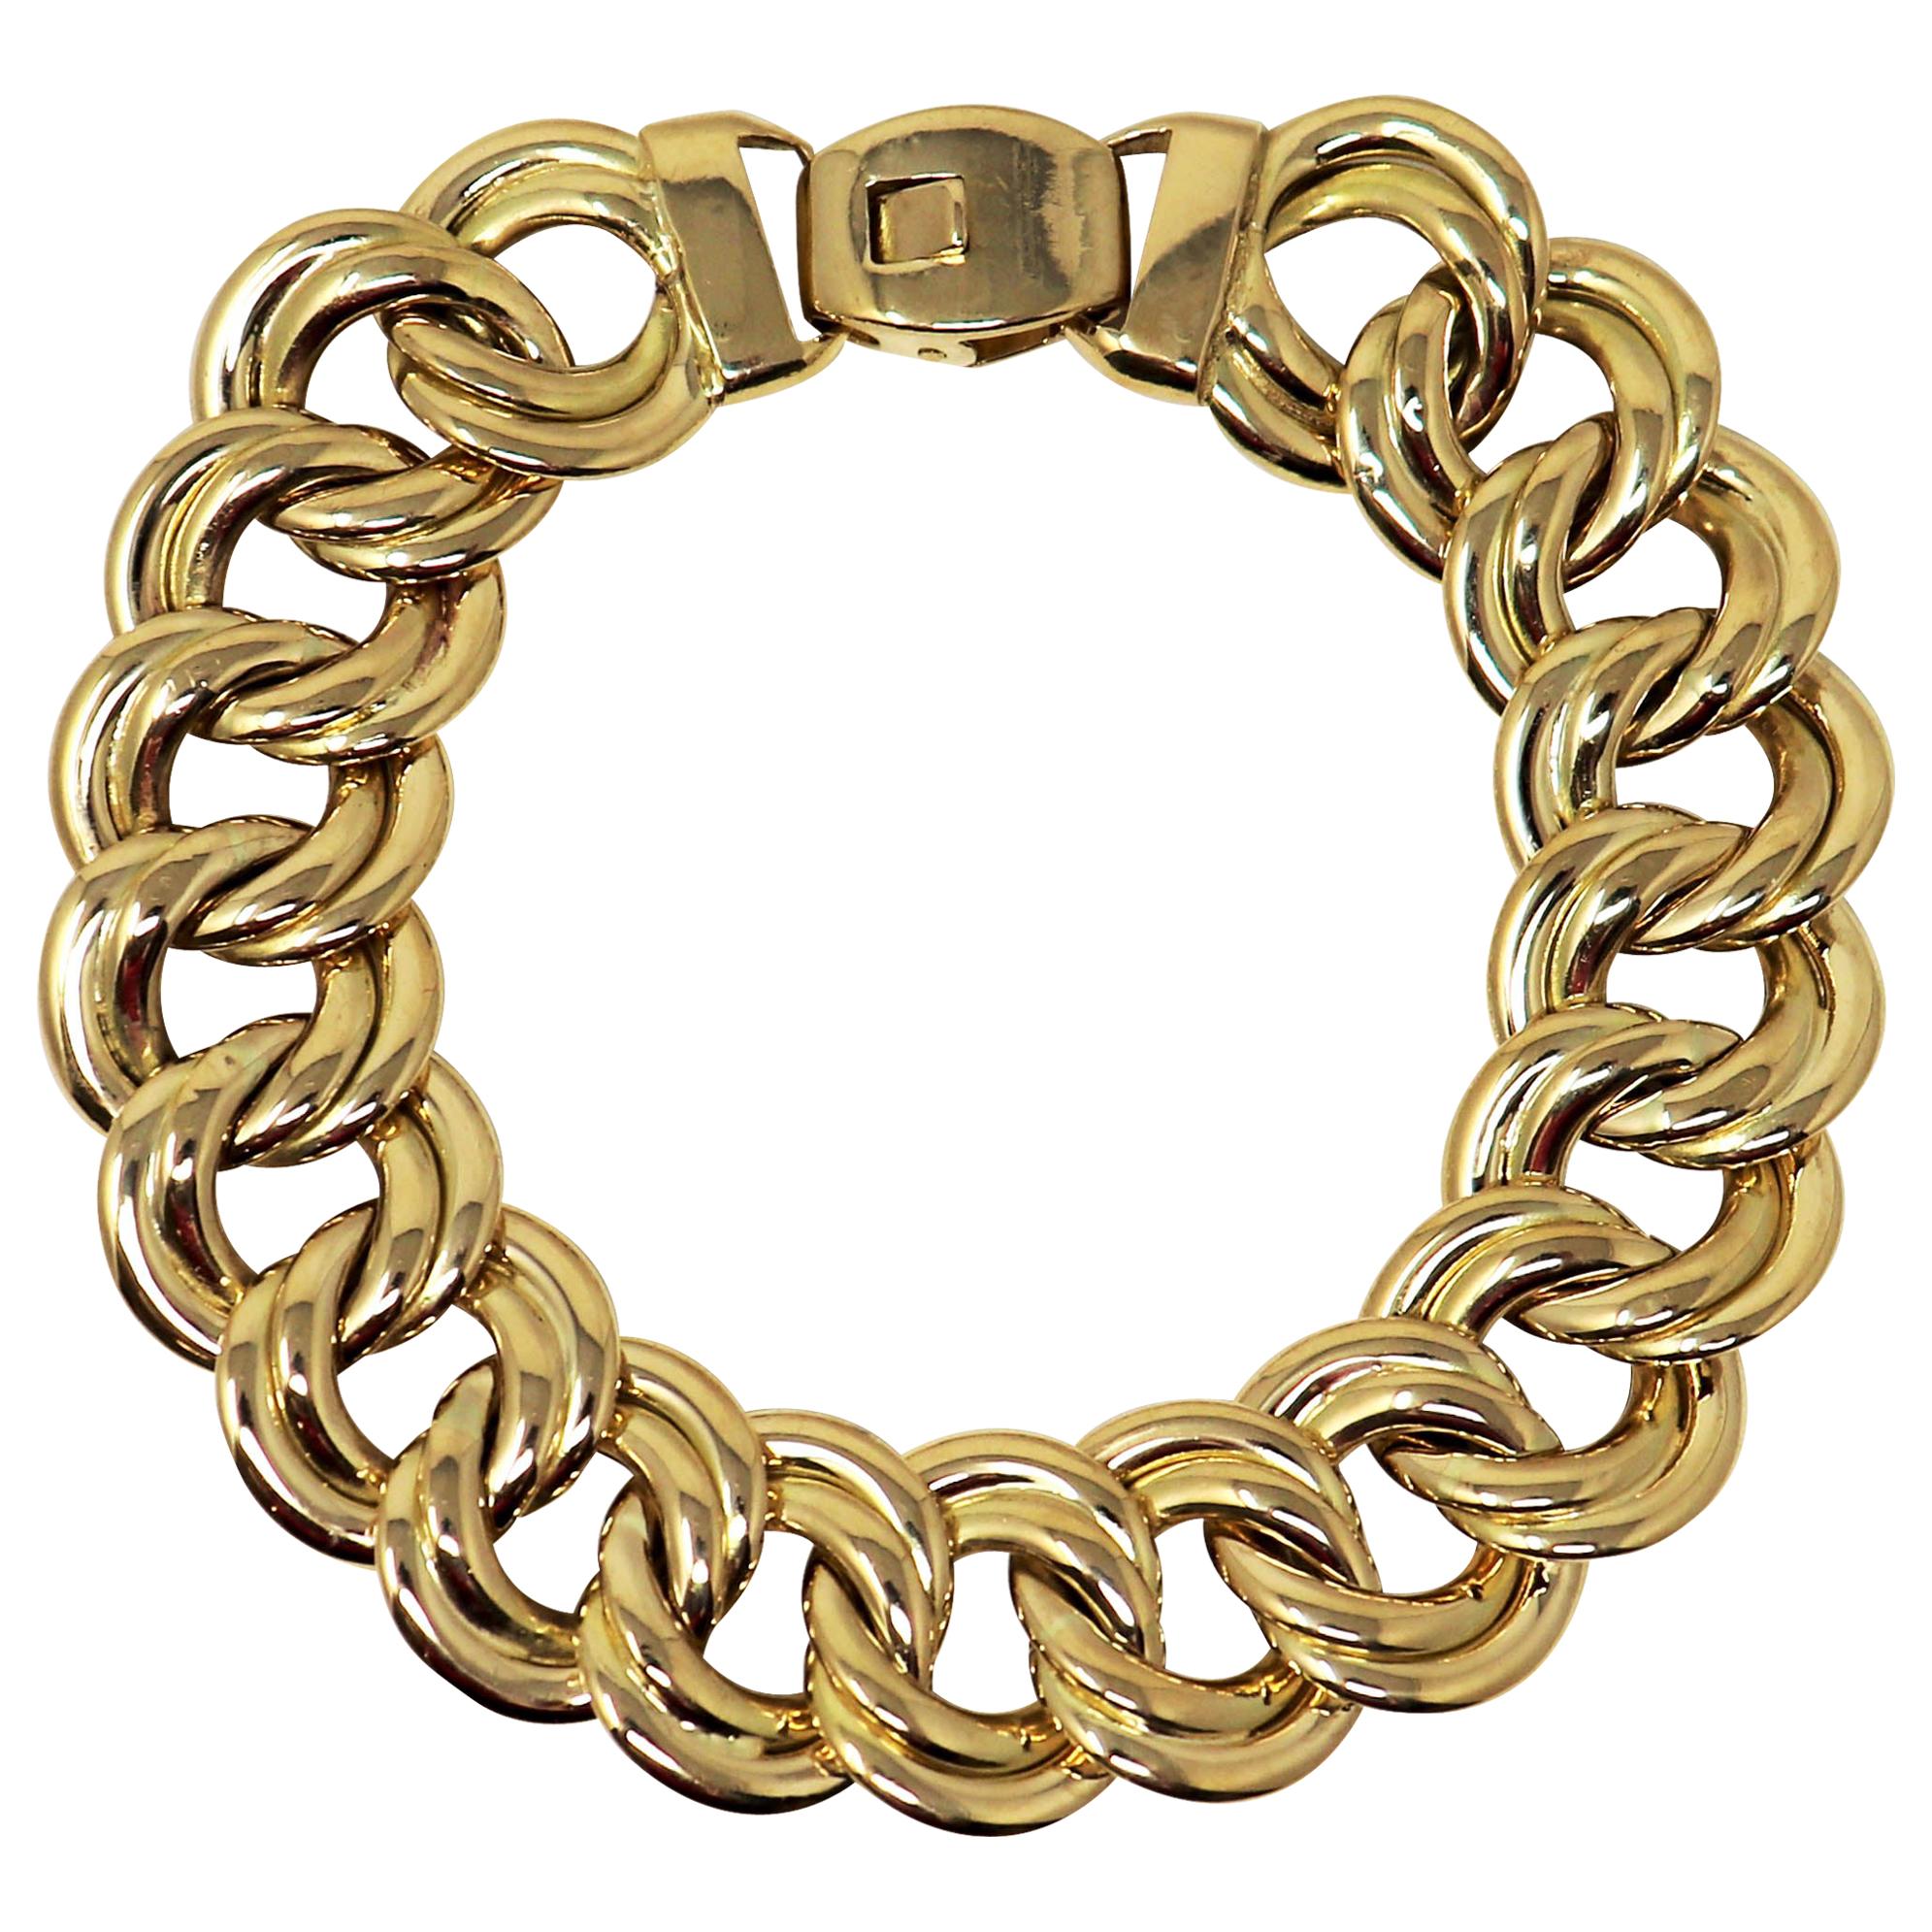 Polished 18 Karat Yellow Gold Italian Double Cable Chain Link Bracelet